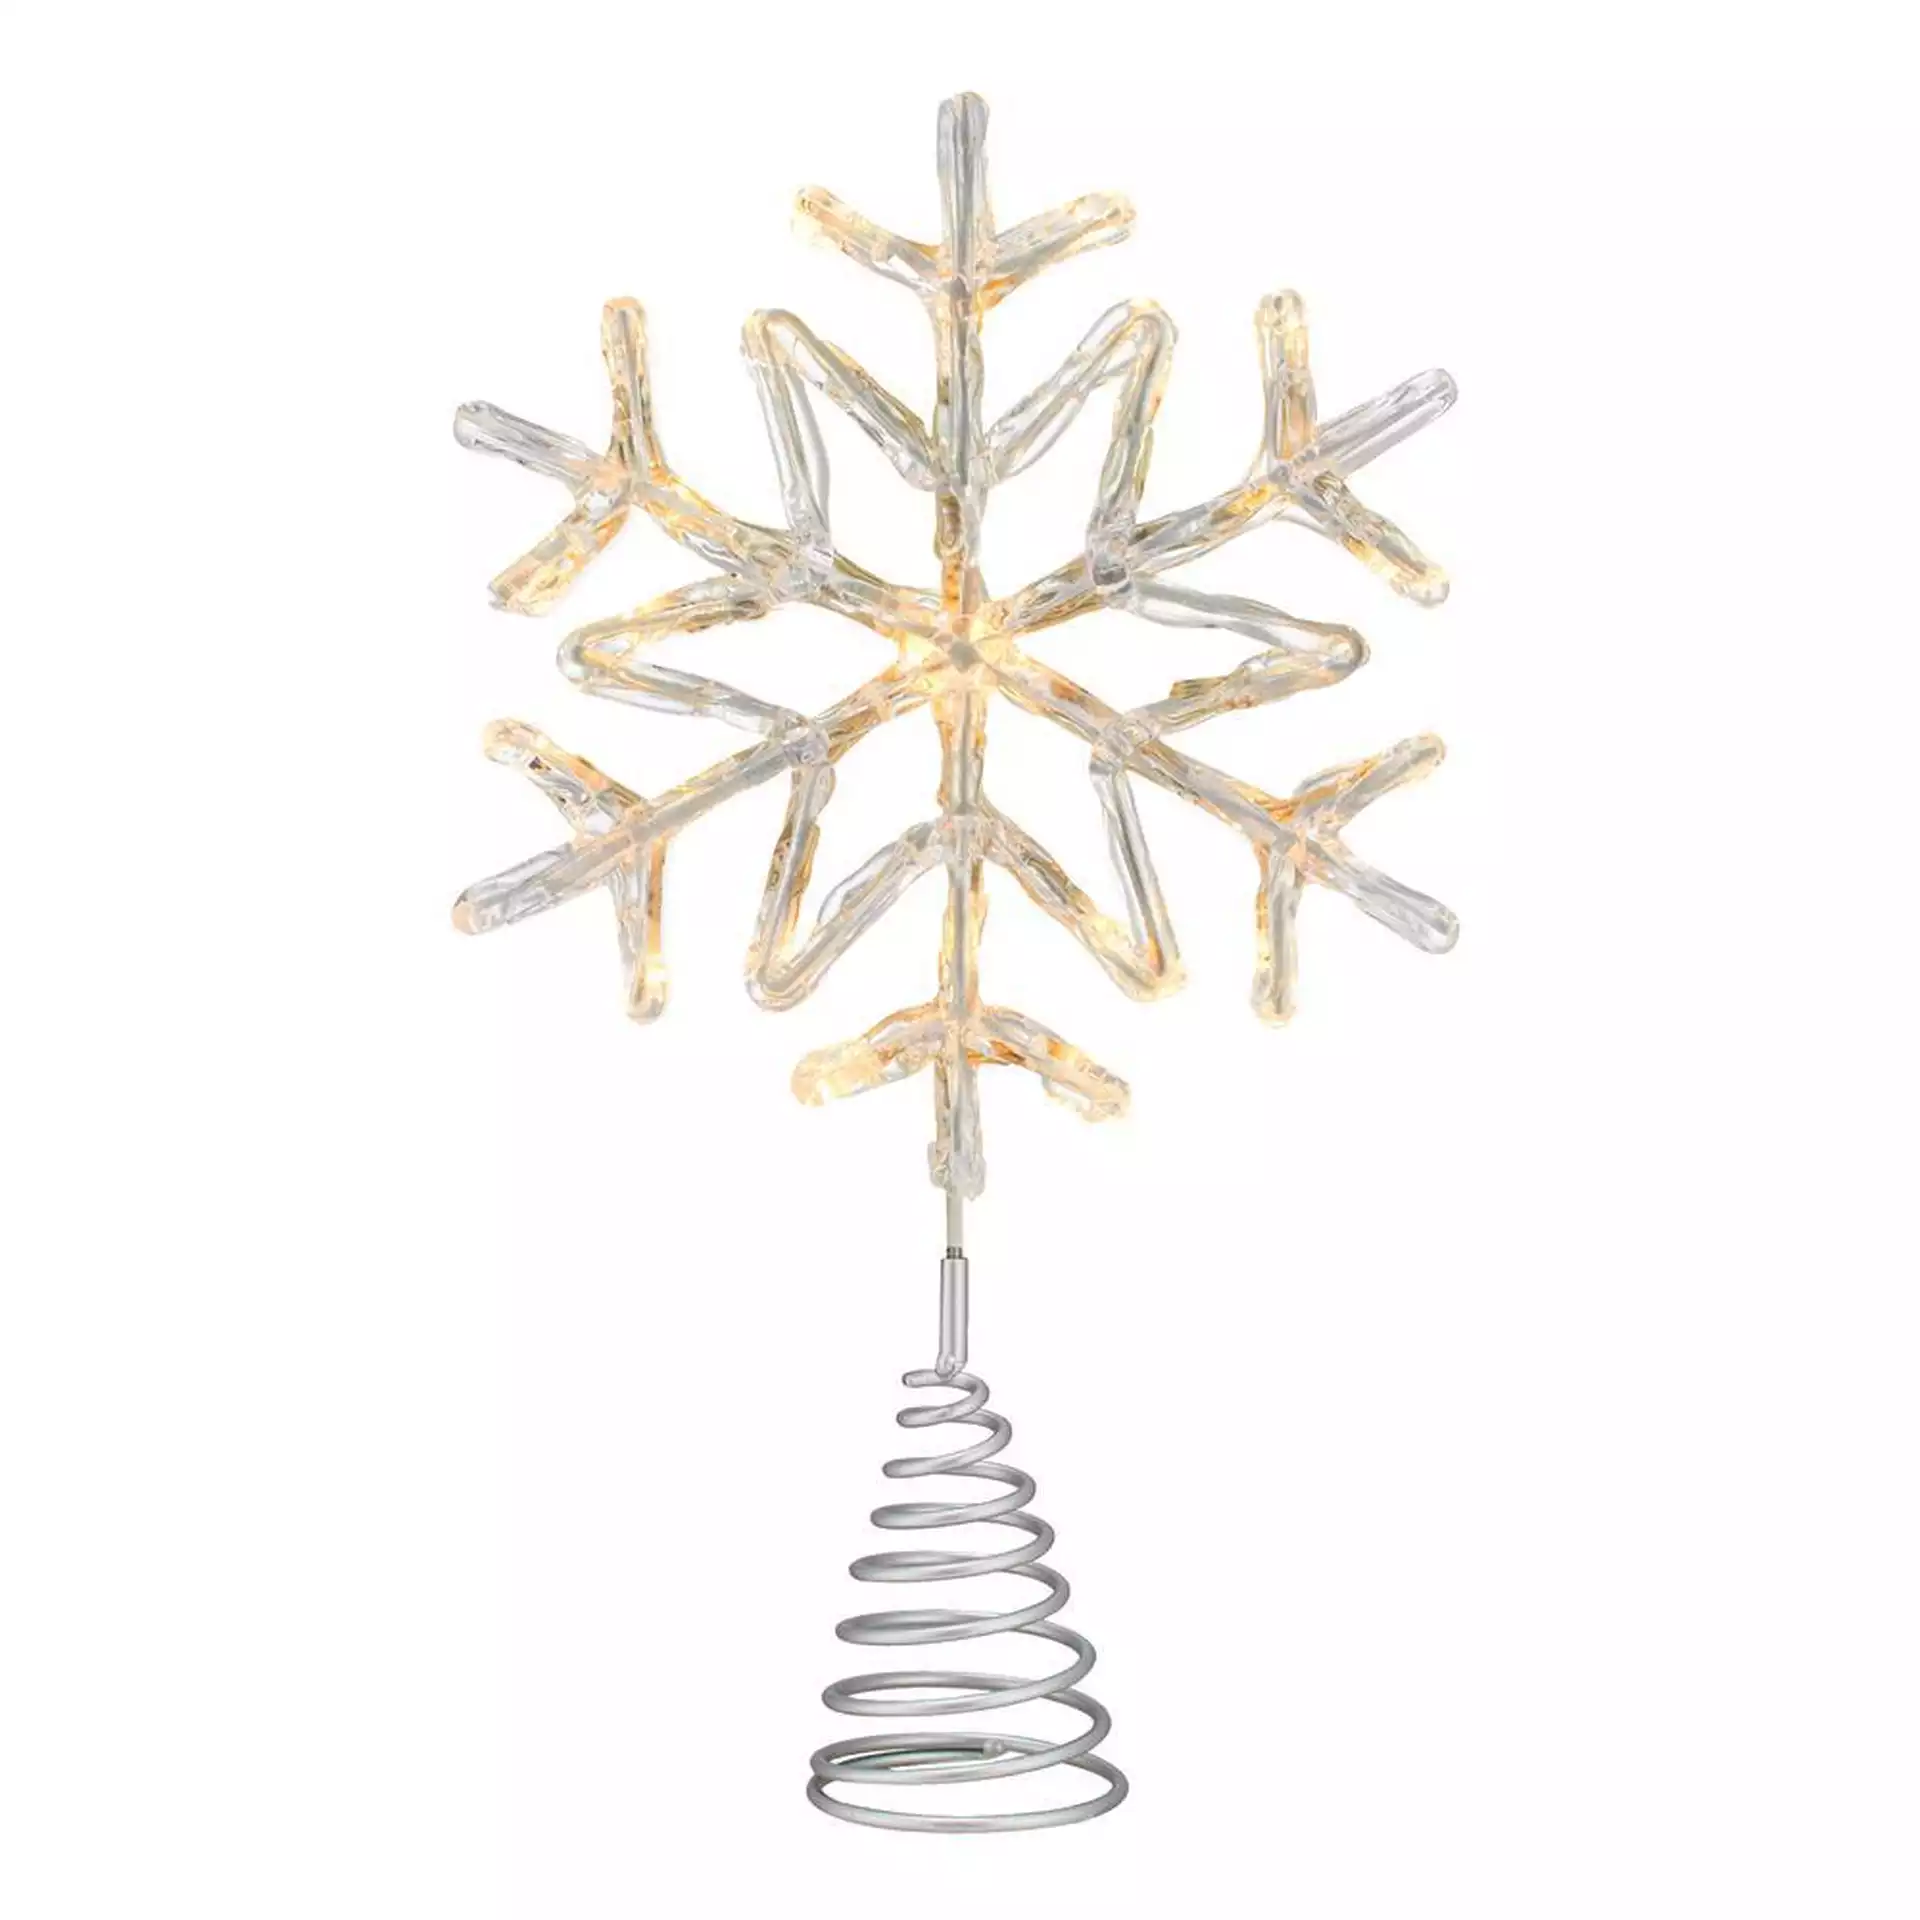 Phillips 14.5 in. 3 Function Bi-Color LED Acrylic Snowflake Christmas Tree Topper